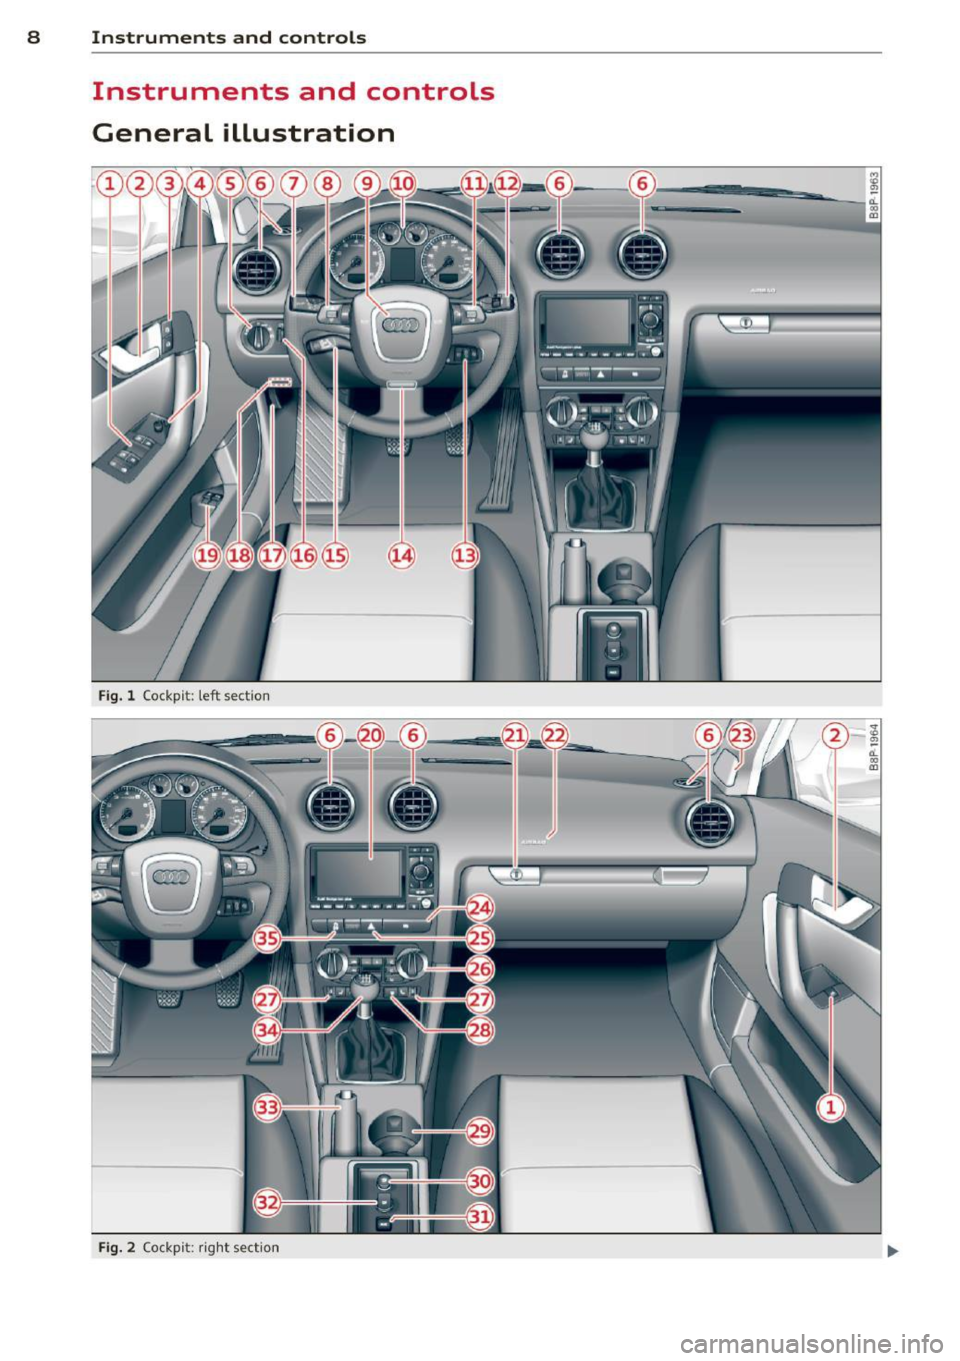 AUDI A3 2012  Owner´s Manual 8  Instruments and controls 
Instruments  and  controls 
General  illustration 
Fig. l Cockp it:  left  sect io n 
Fig. 2 Co ck pi t: ri ght  sect io n 
" 
~:::::.--a!!!,~- -i  